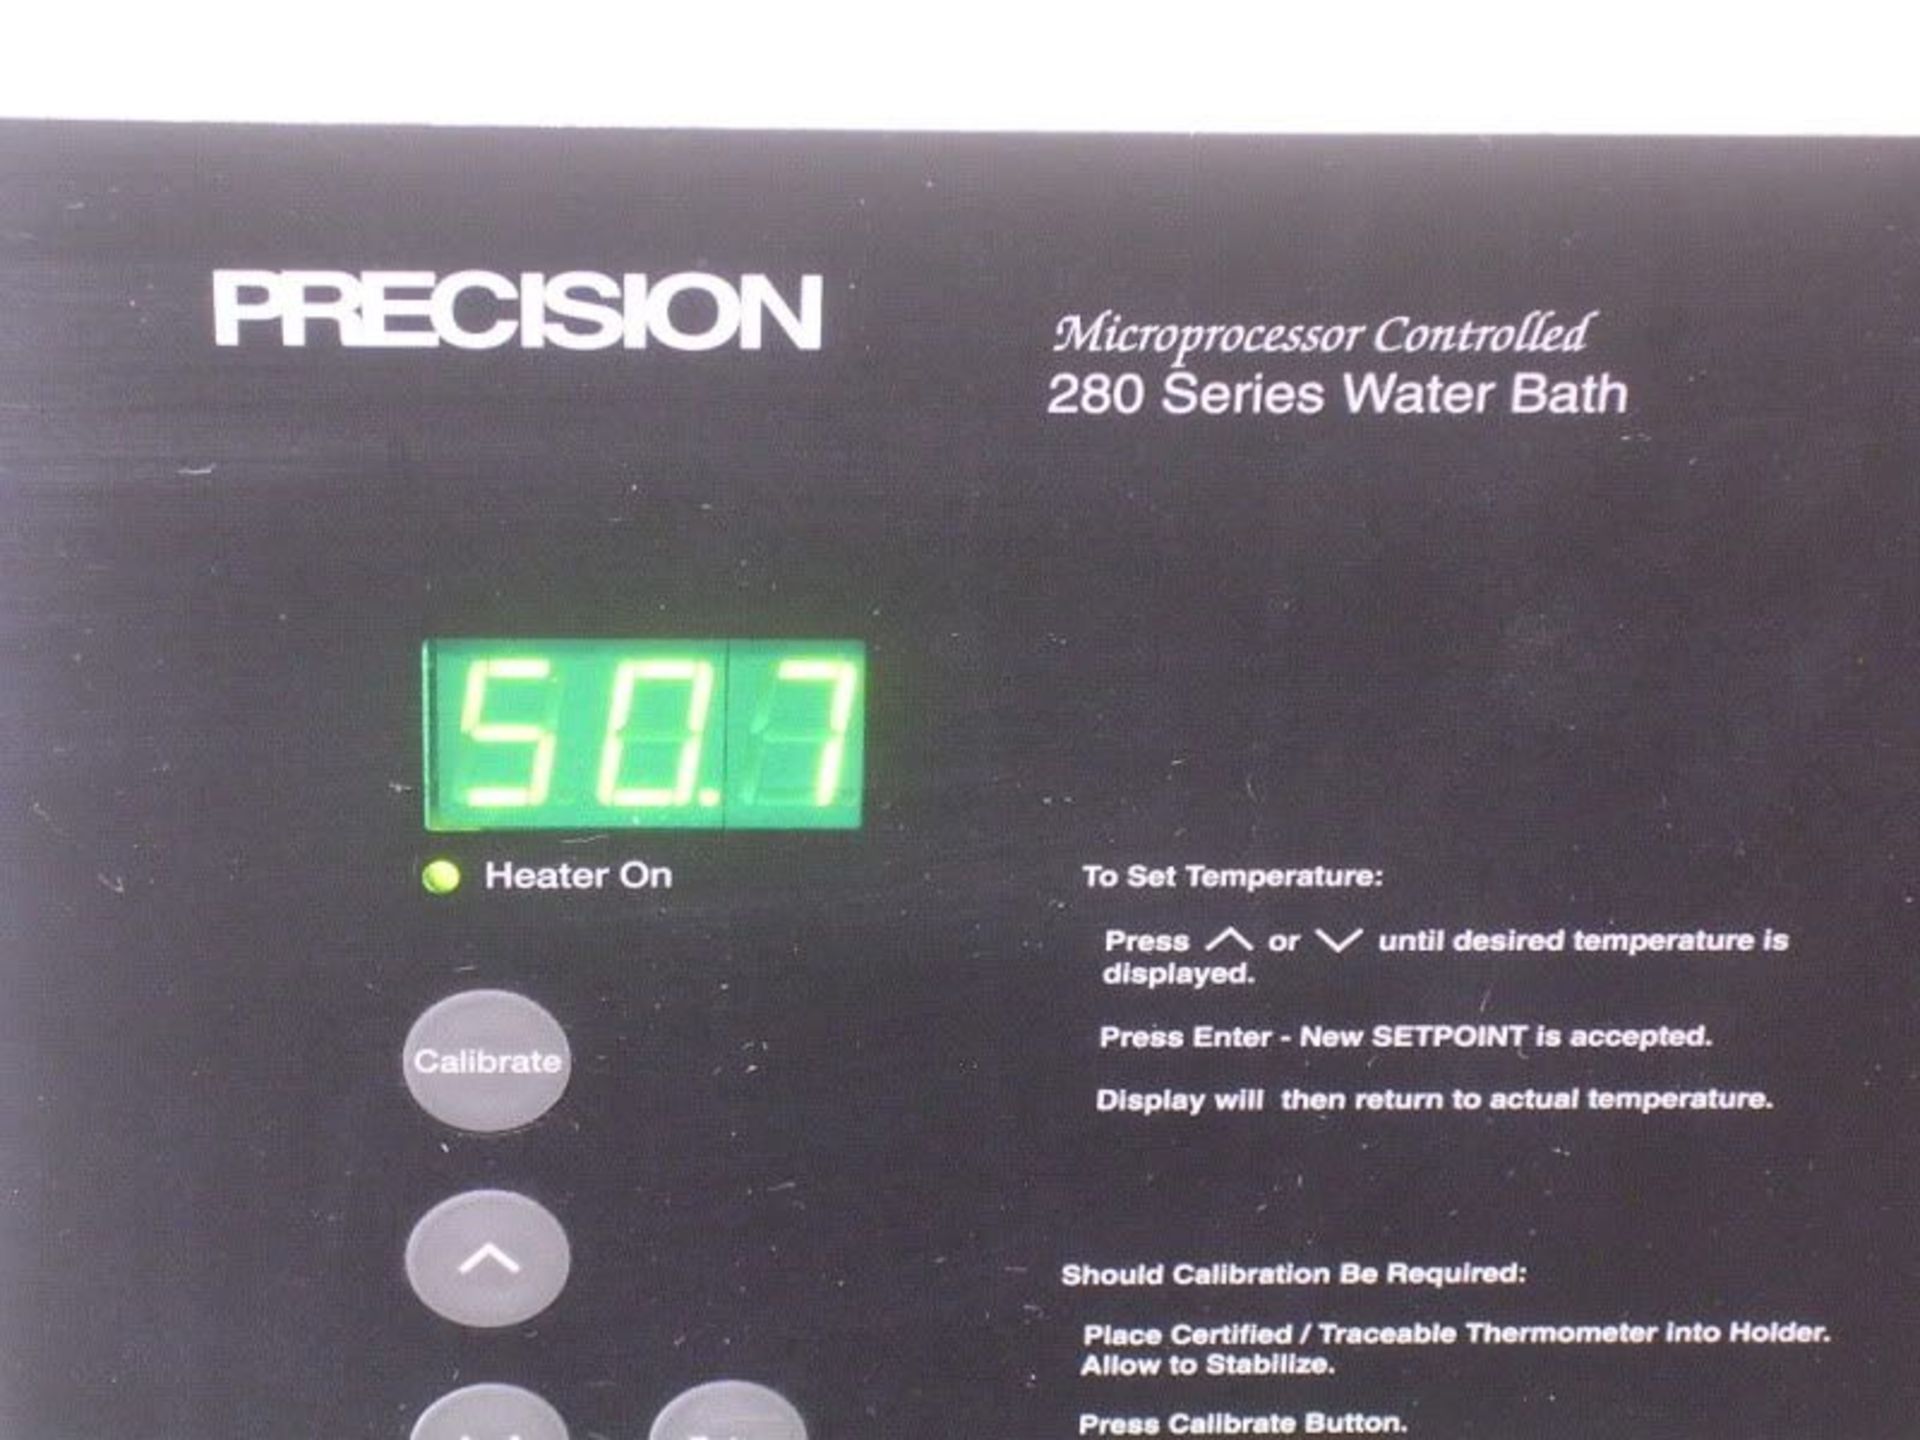 Precision Scientific Microprocessor Controlled 280 Series Dual Heated Water Bath, Qty 1, - Image 2 of 8